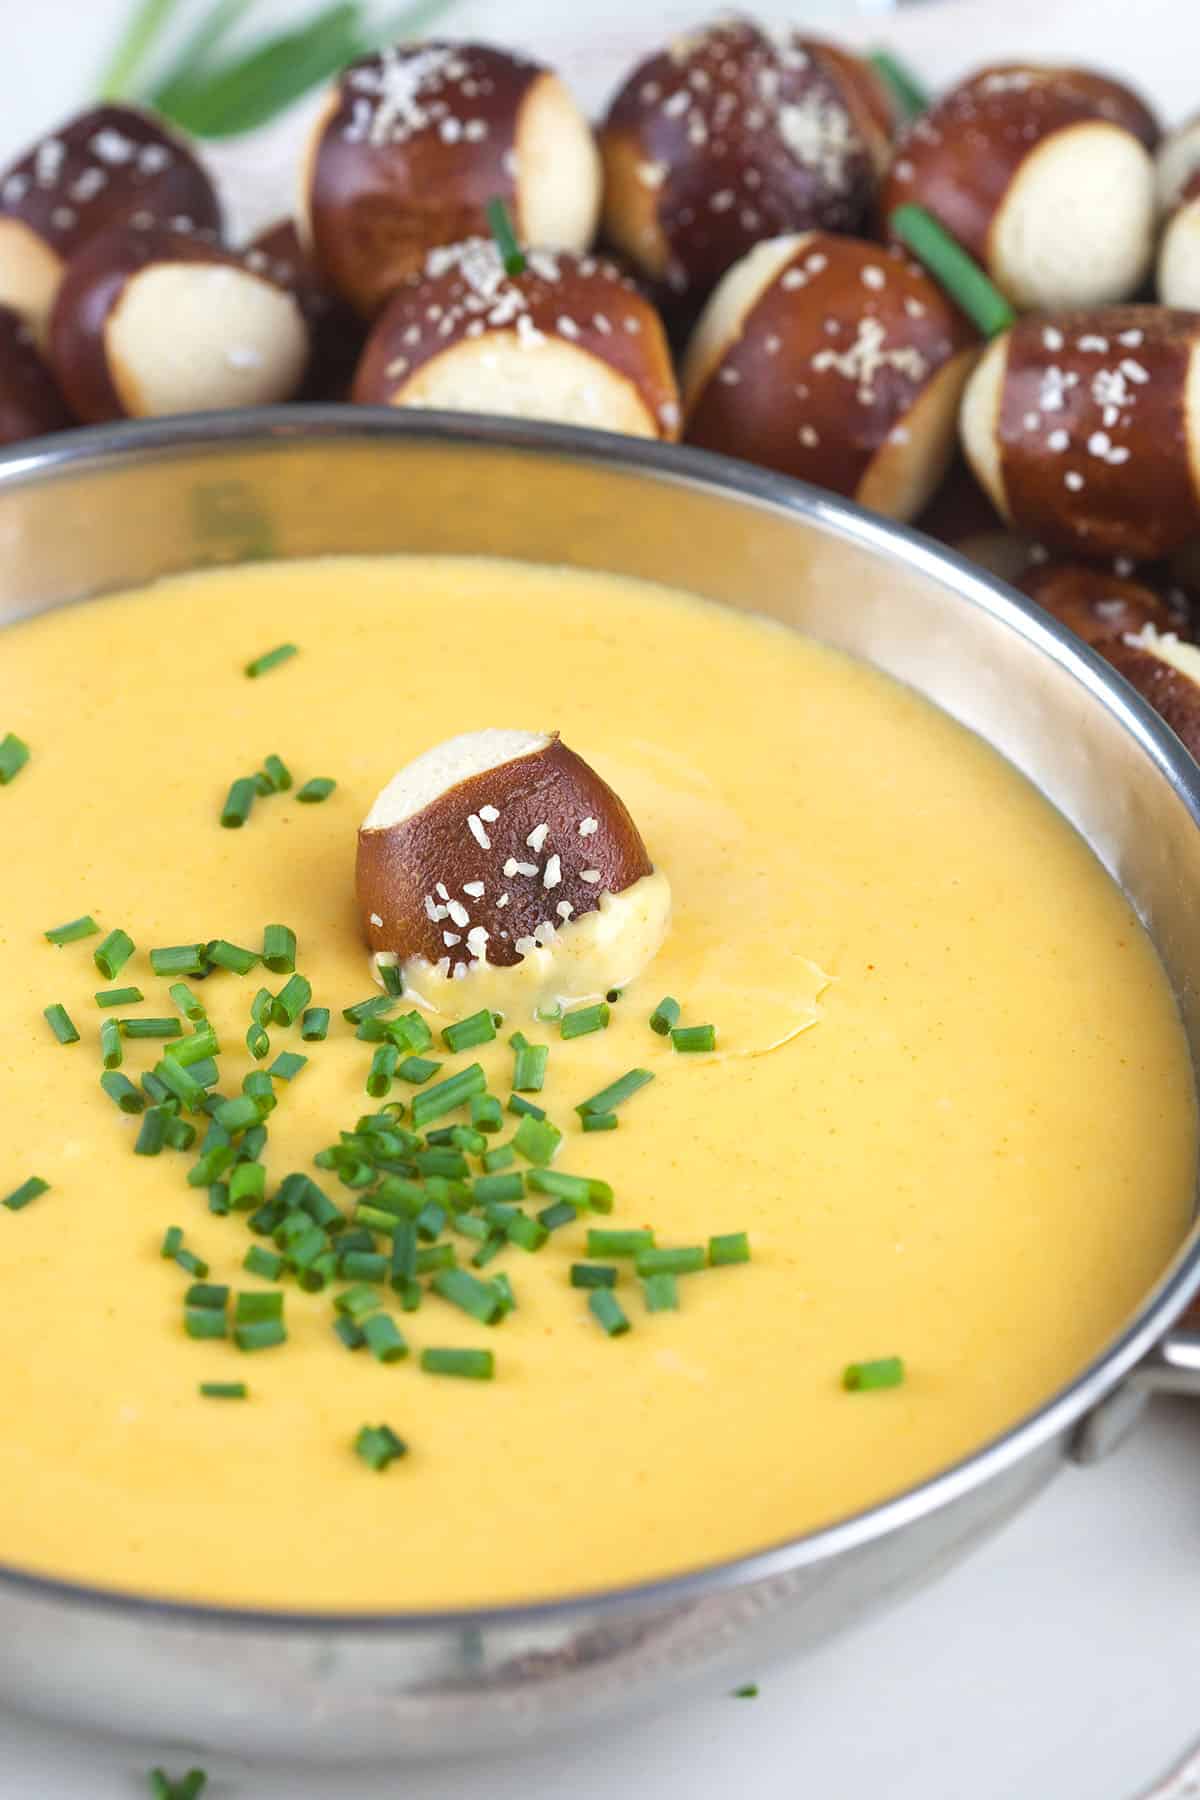 Chopped chives and one soft pretzel bite garnish a bowl of cheese dip.